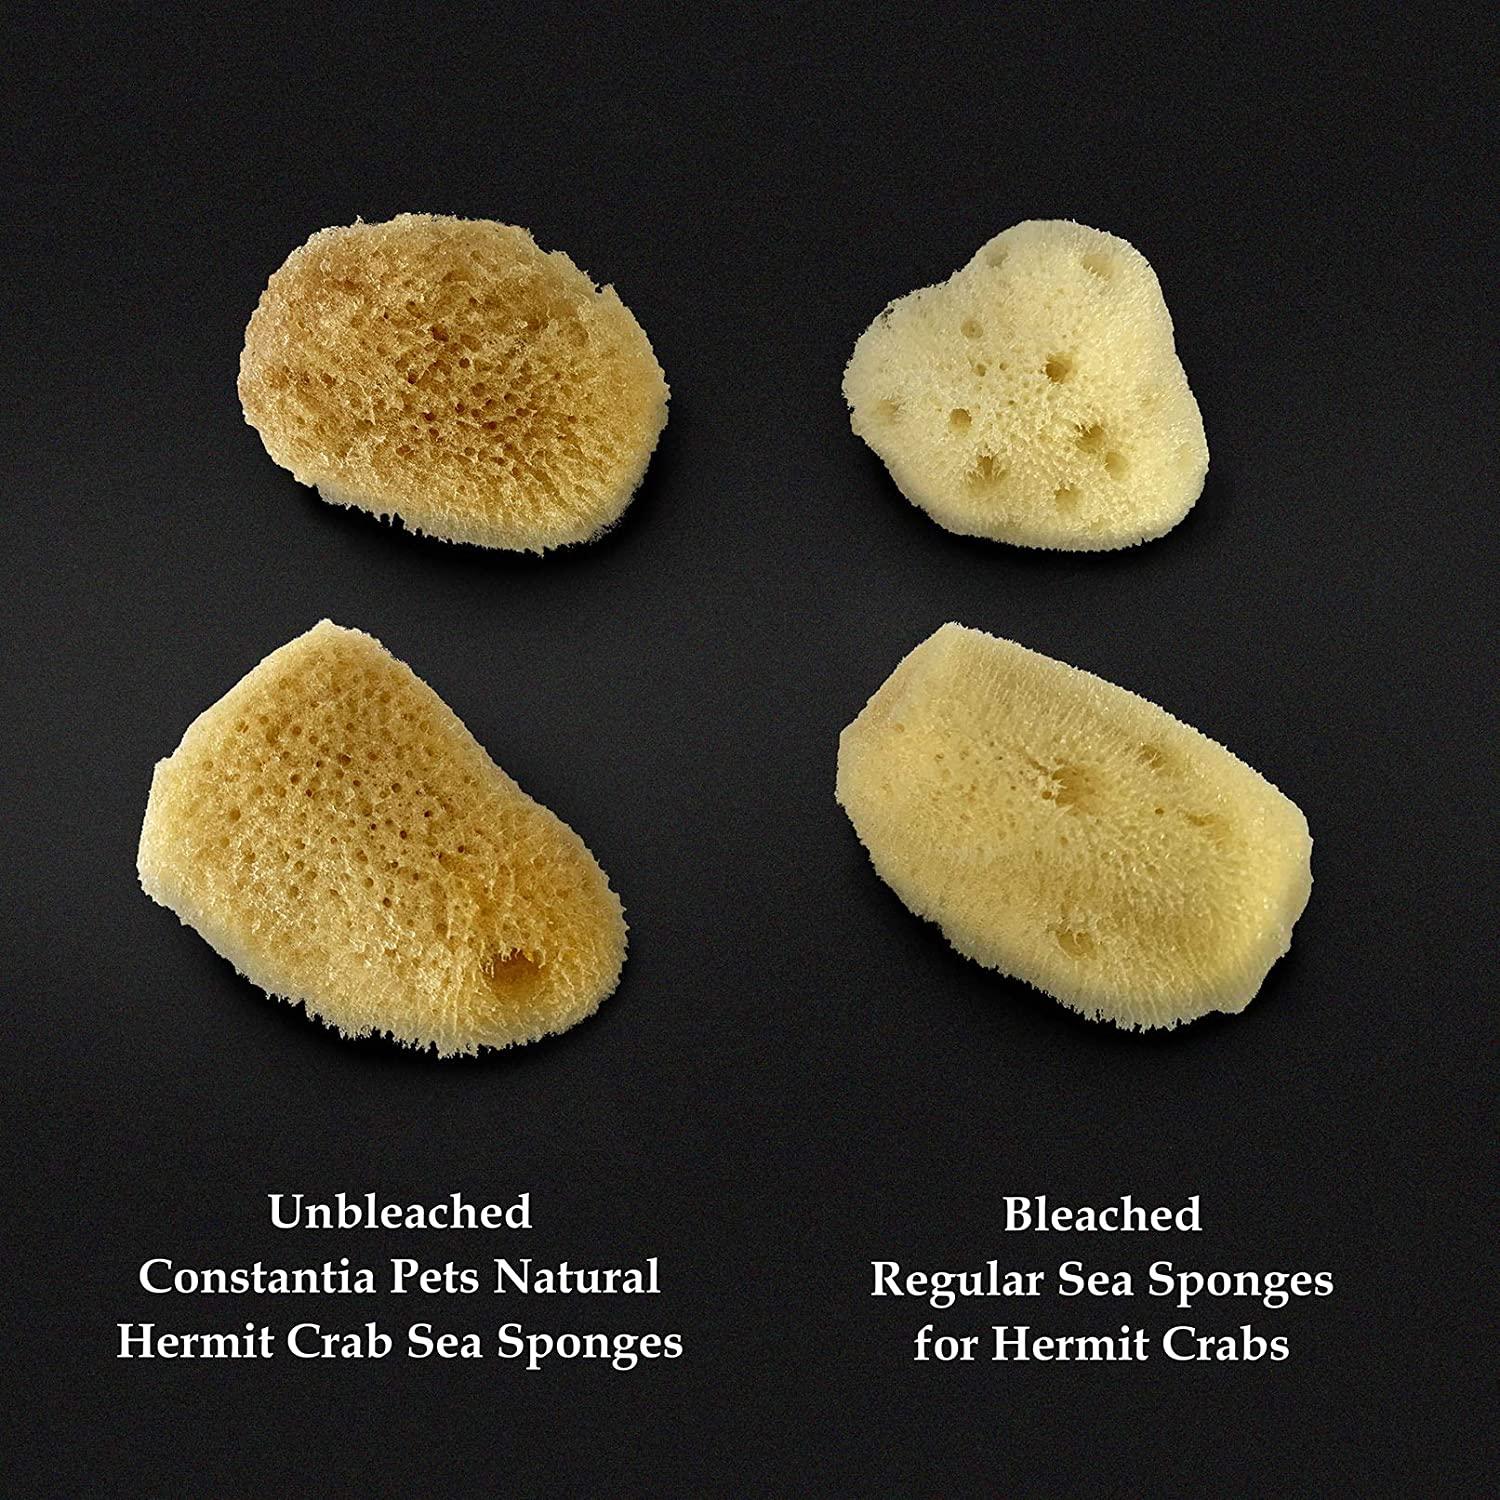 4-Pack of Natural Hermit Crab Sea Sponges - All Natural Sponge for Crabs 